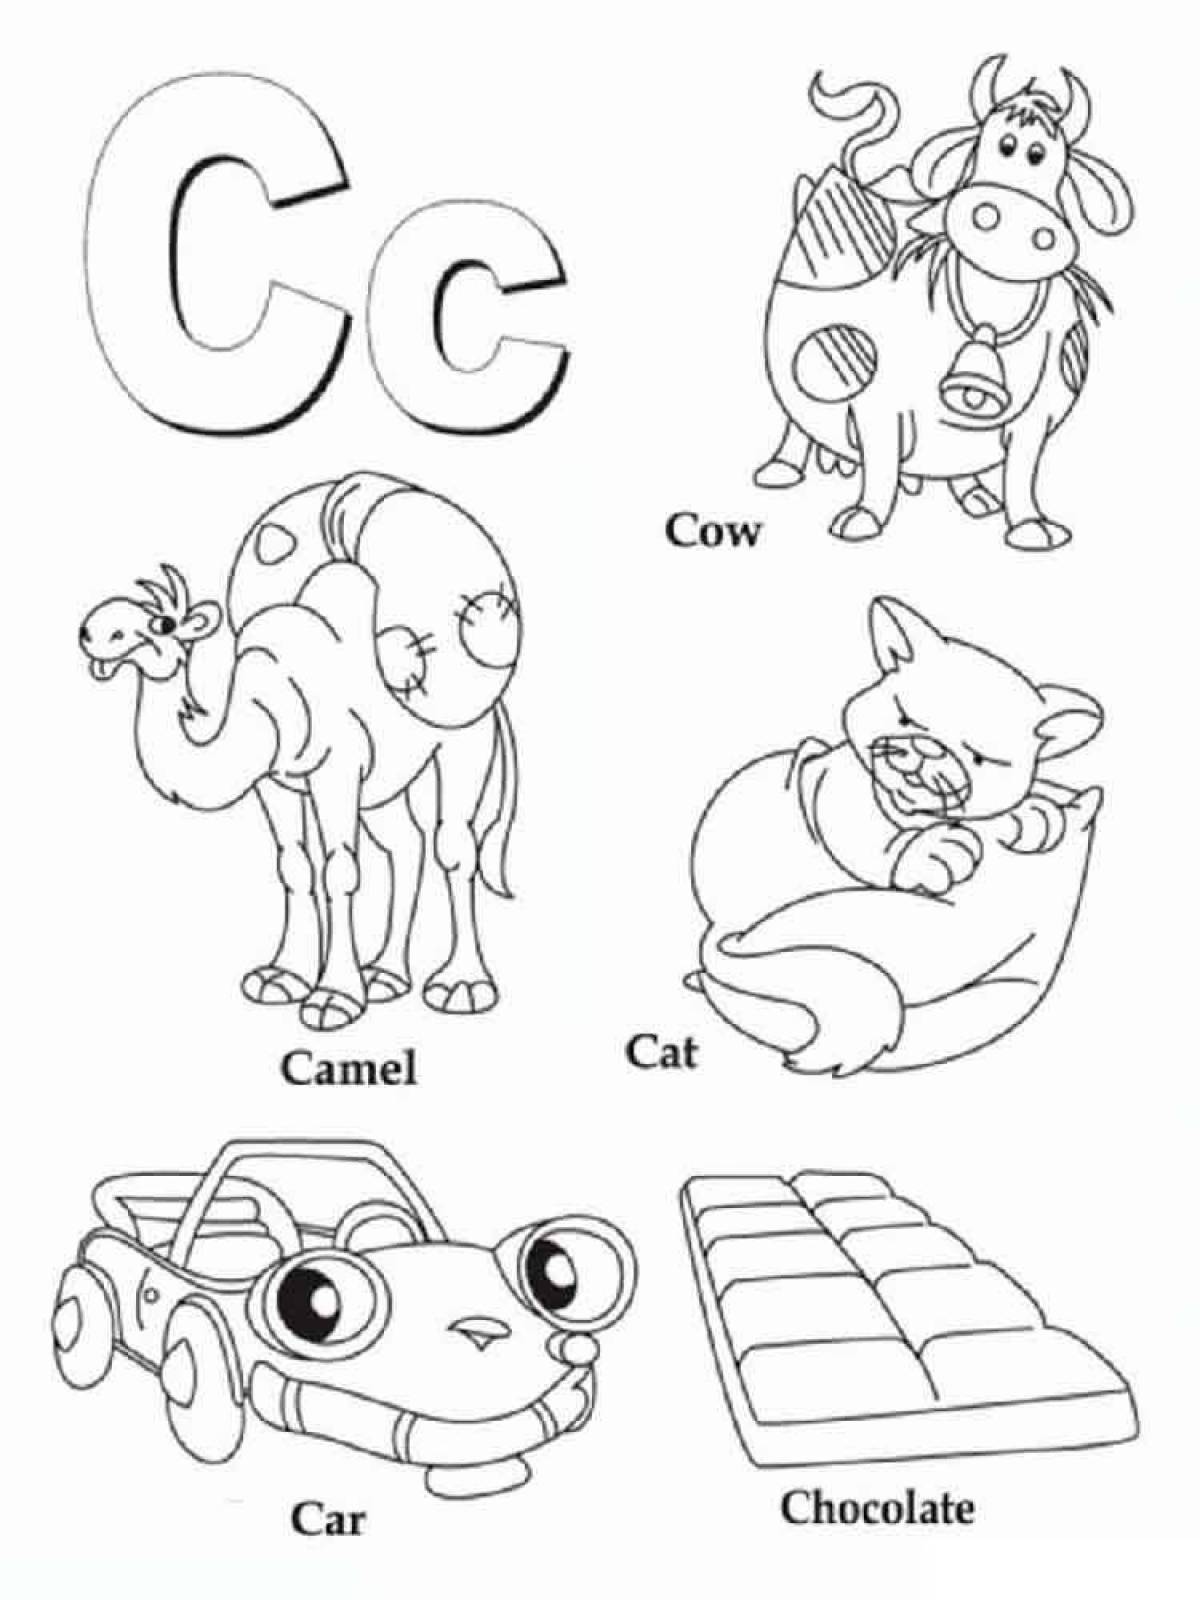 Colorful english alphabet coloring page for beginners